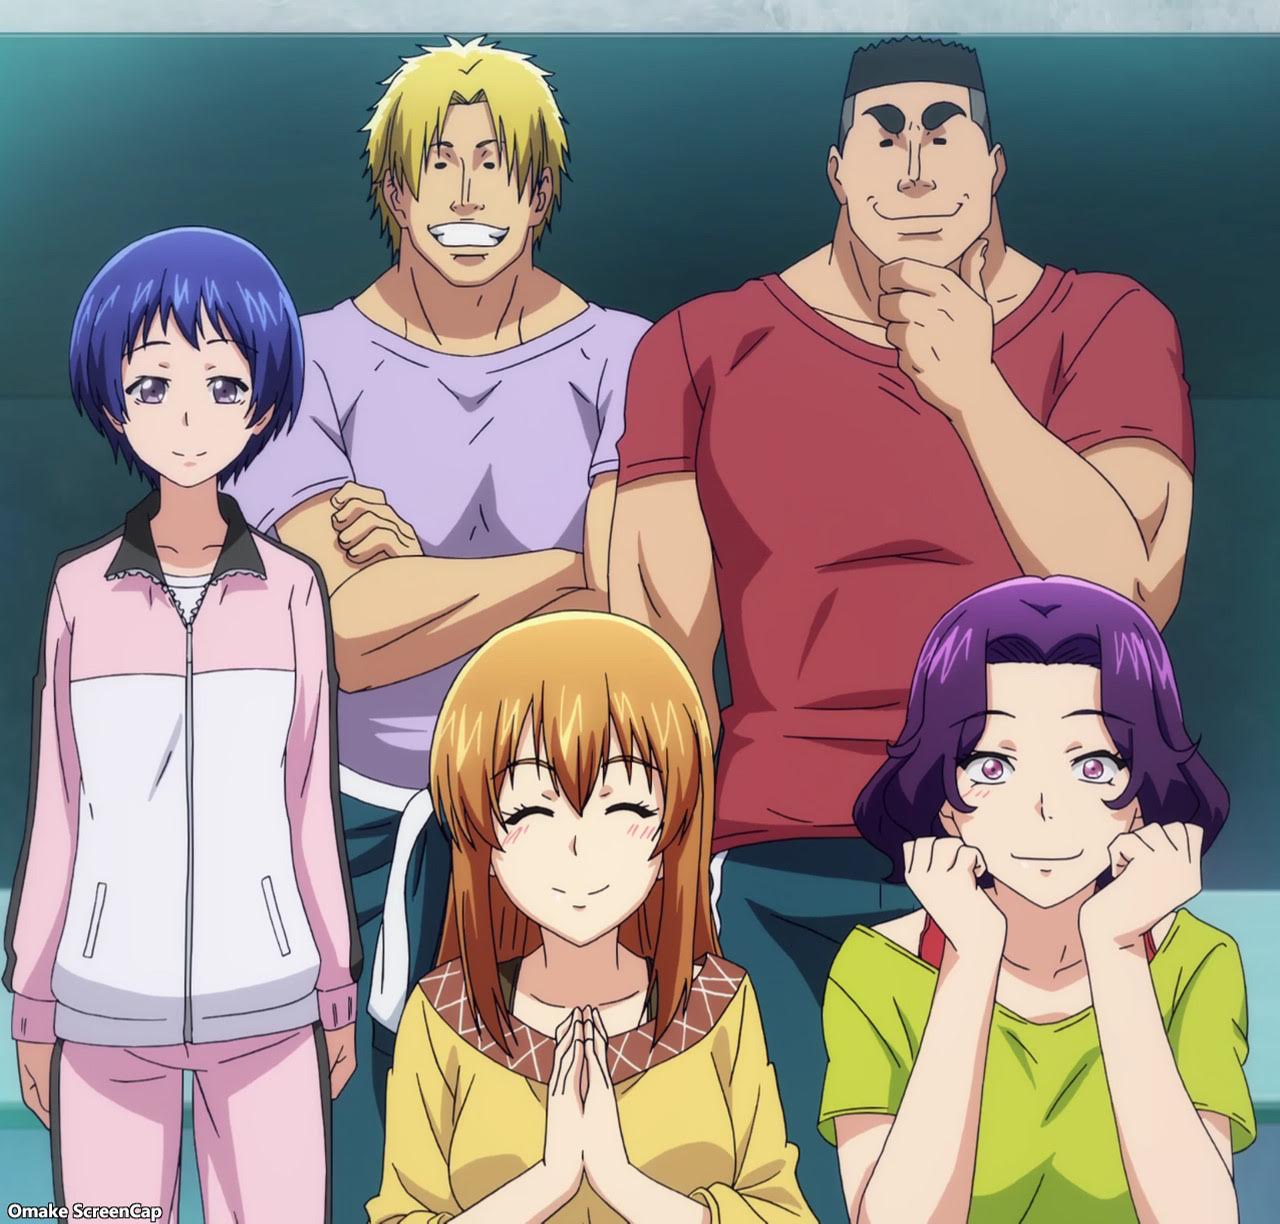 Grand Blue Archives - Star Crossed Anime